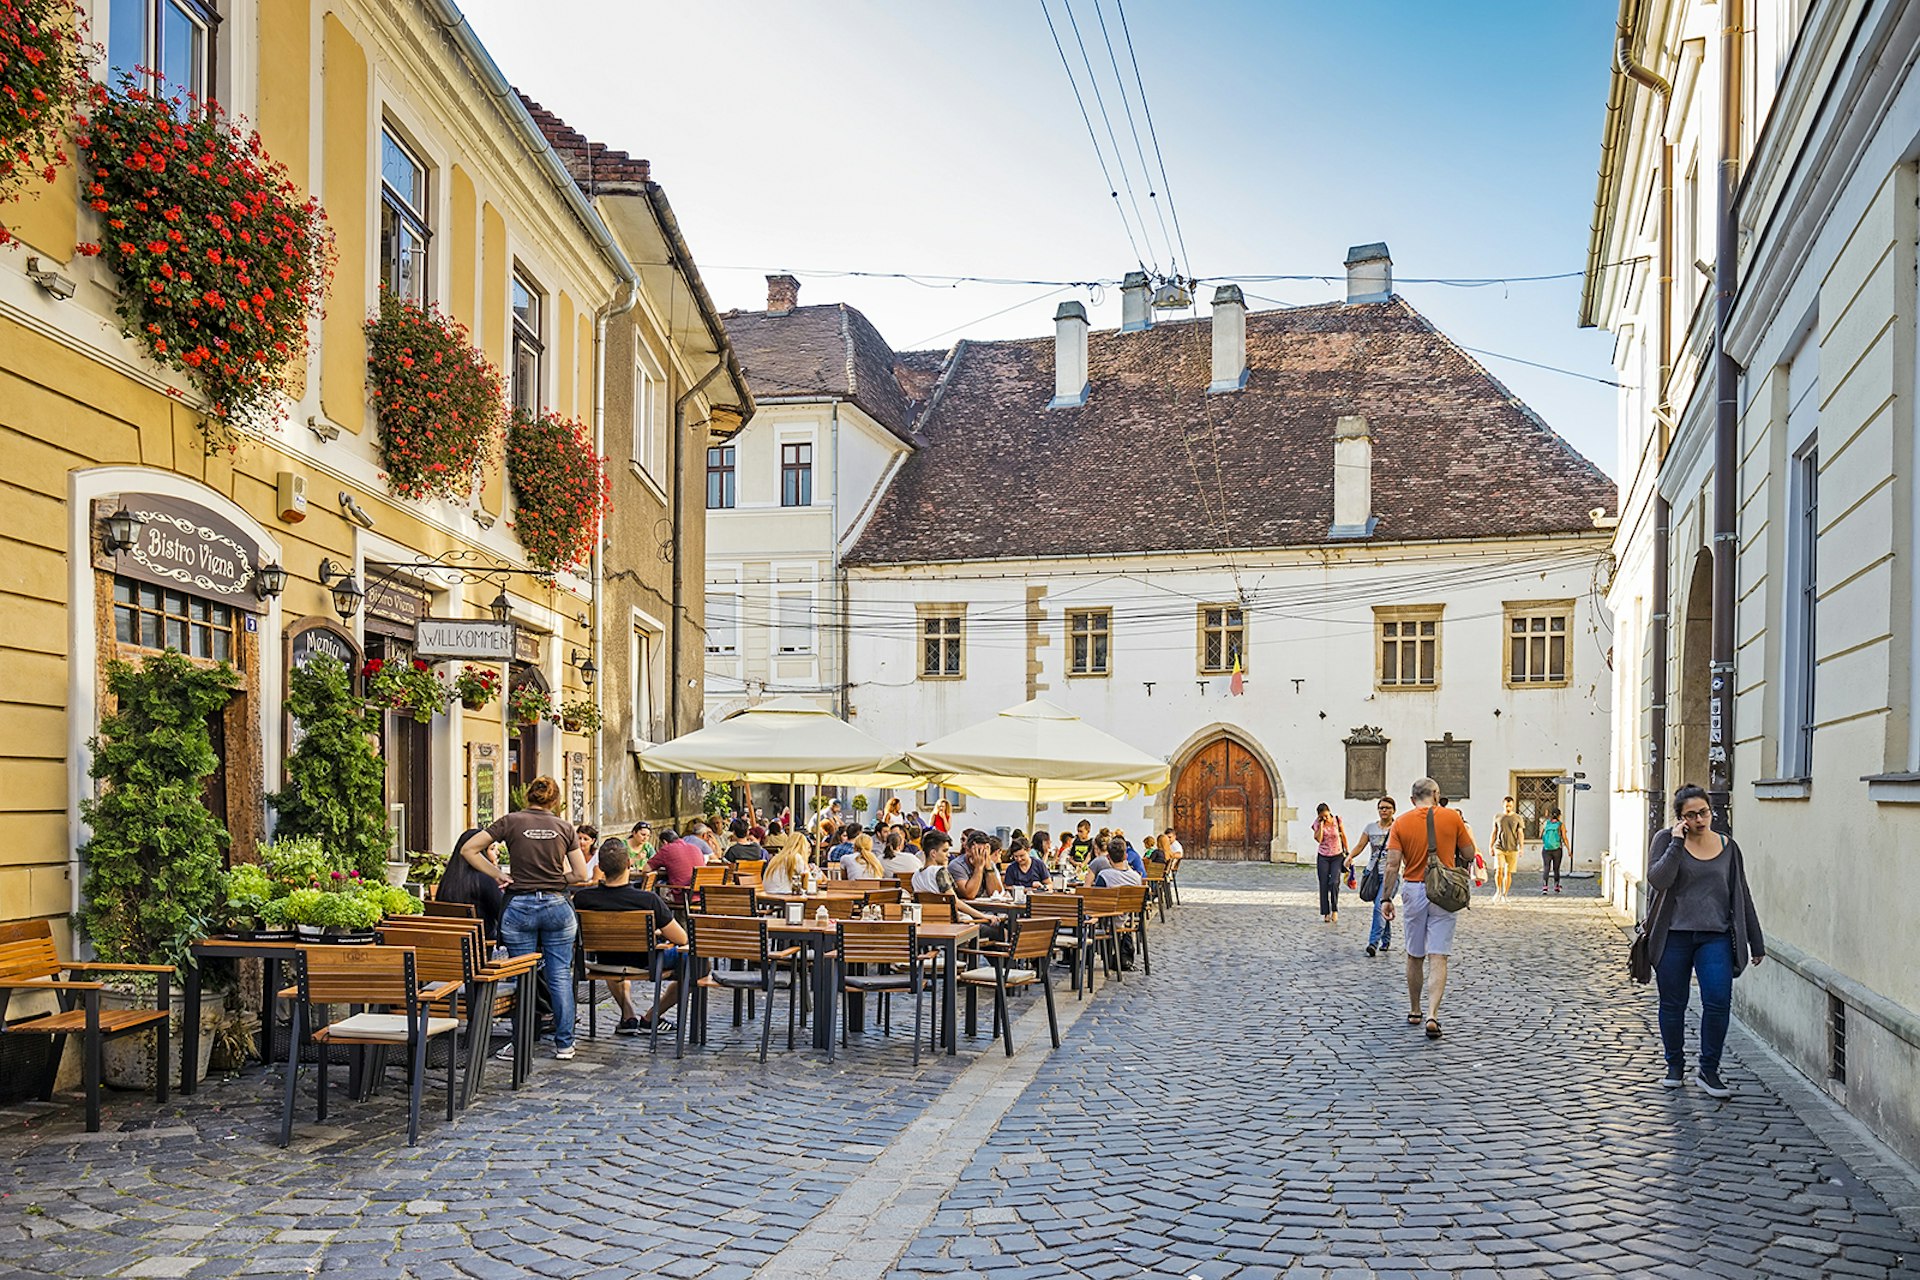 People sit on an outdoor patio in a cobblestoned plaza, surrounded by white and yellow historic buildings. The building on the left has large flower boxes in the windows. Cluj-Napoca, Romania.